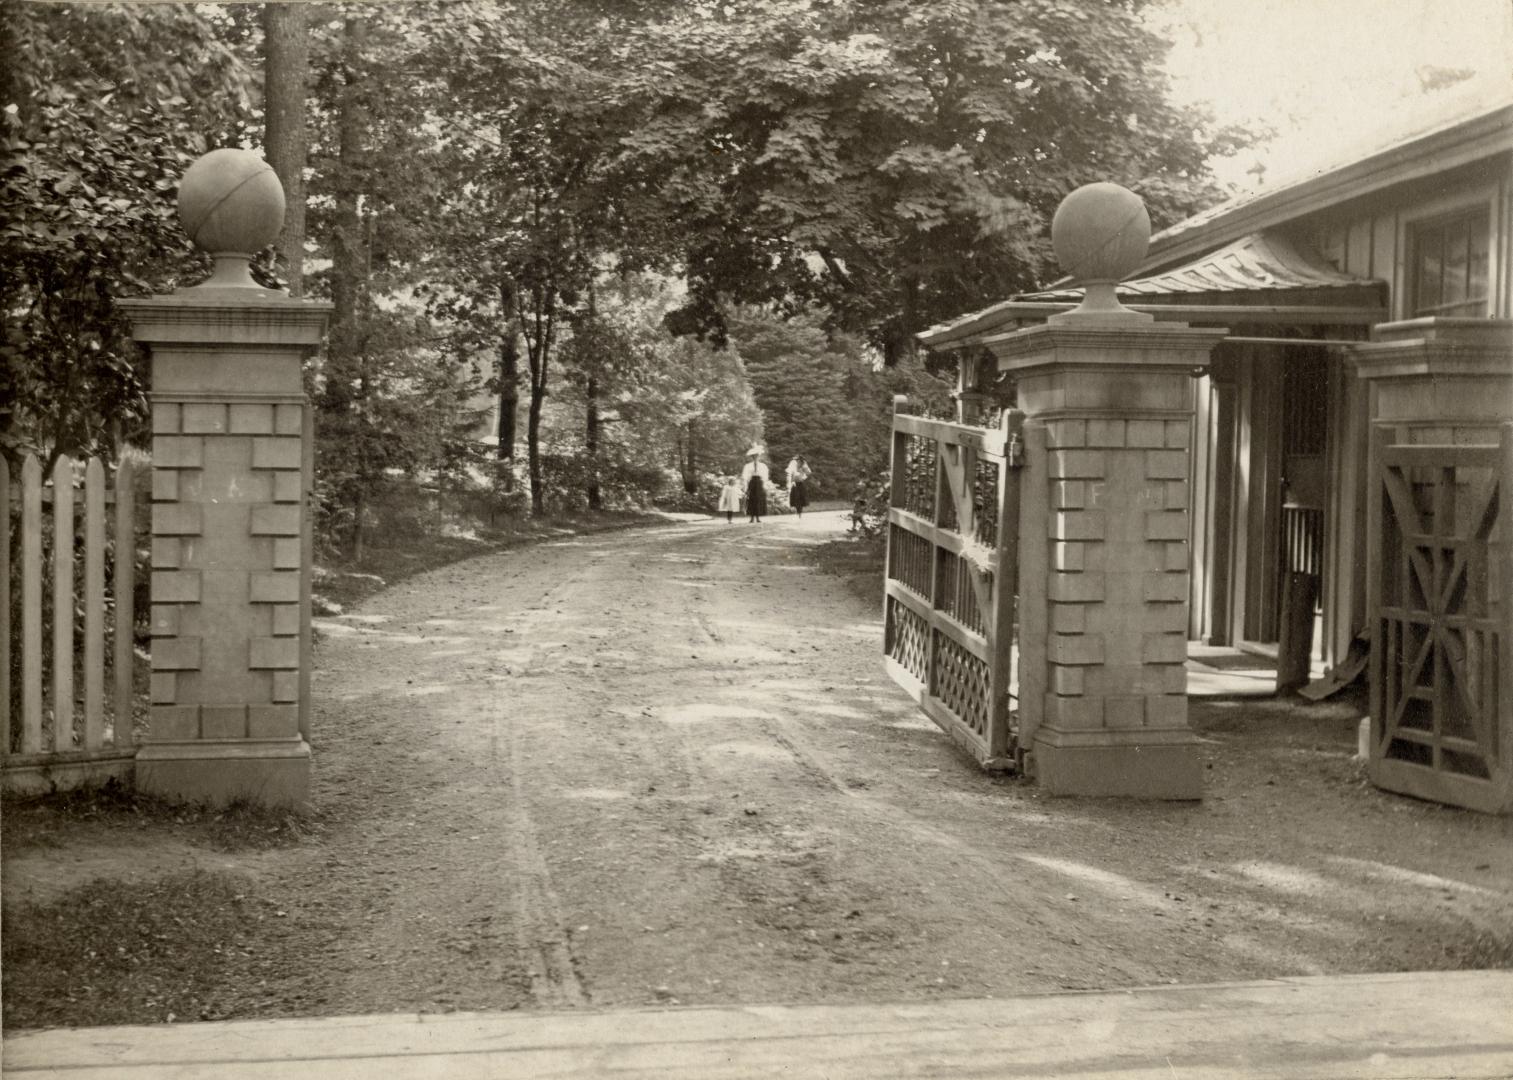 Image shows open gates leading along the road with lots of trees around.